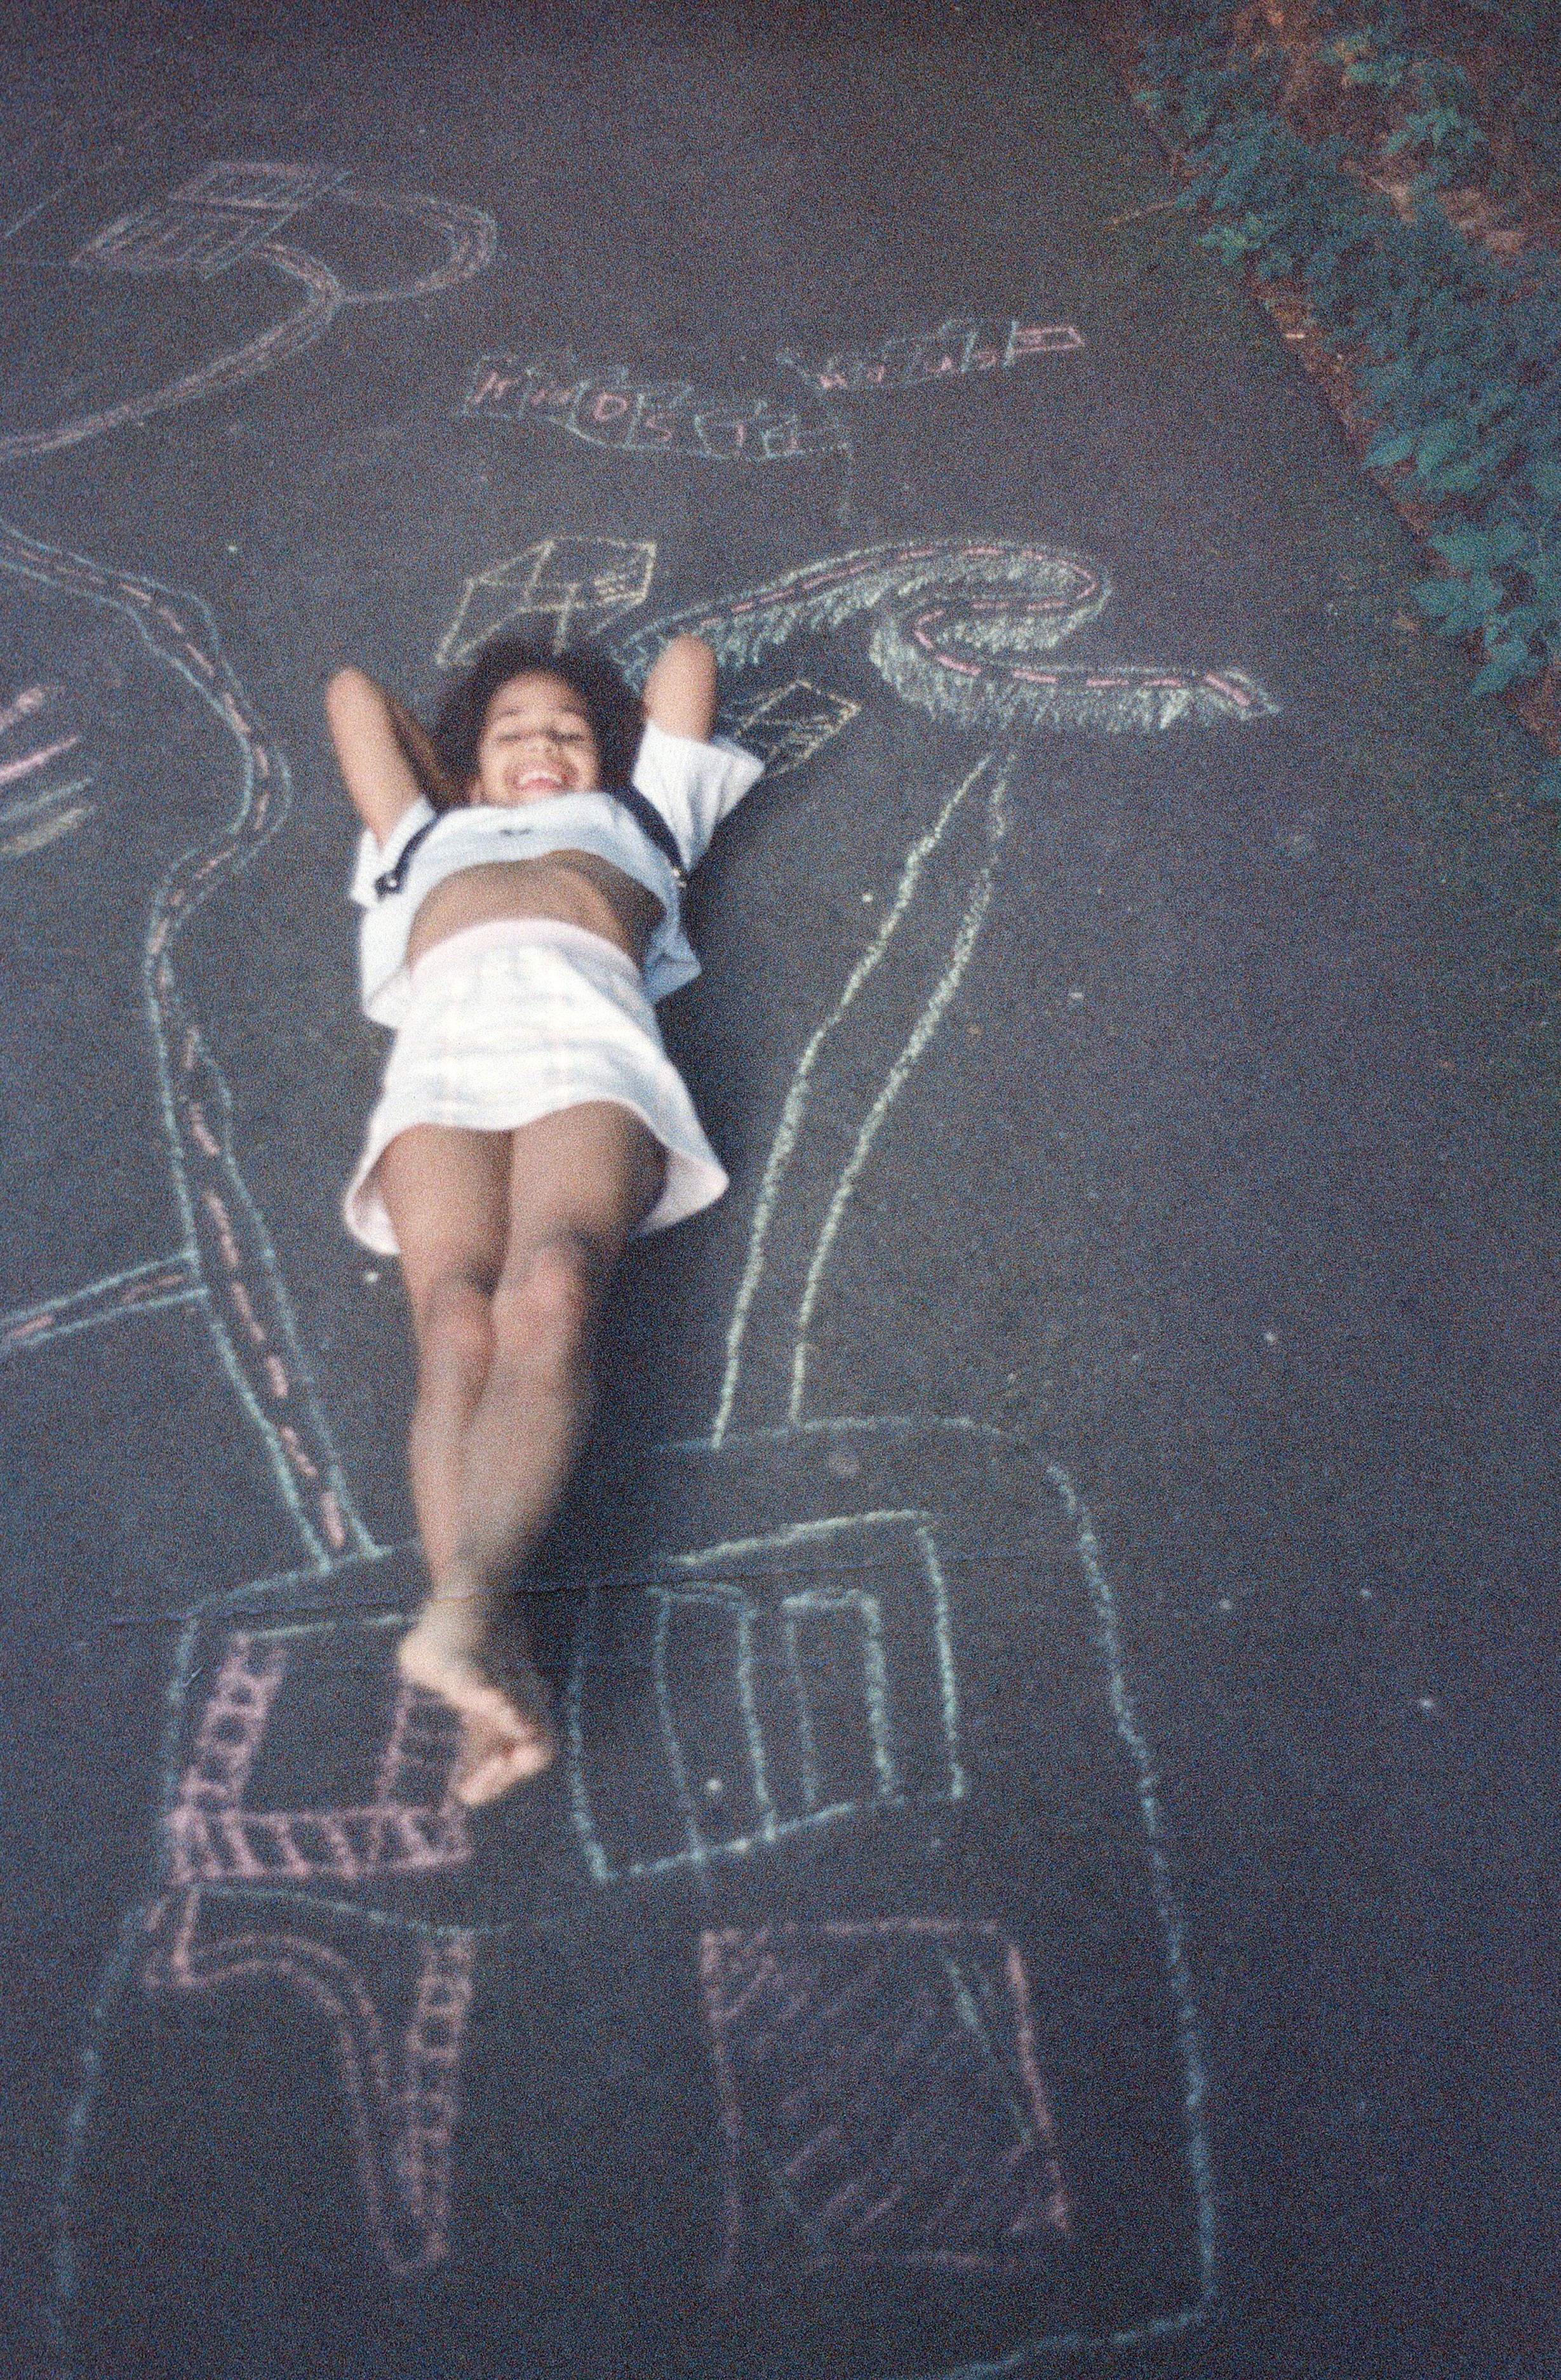 1991 or so Summer on chalked MV driveway 01